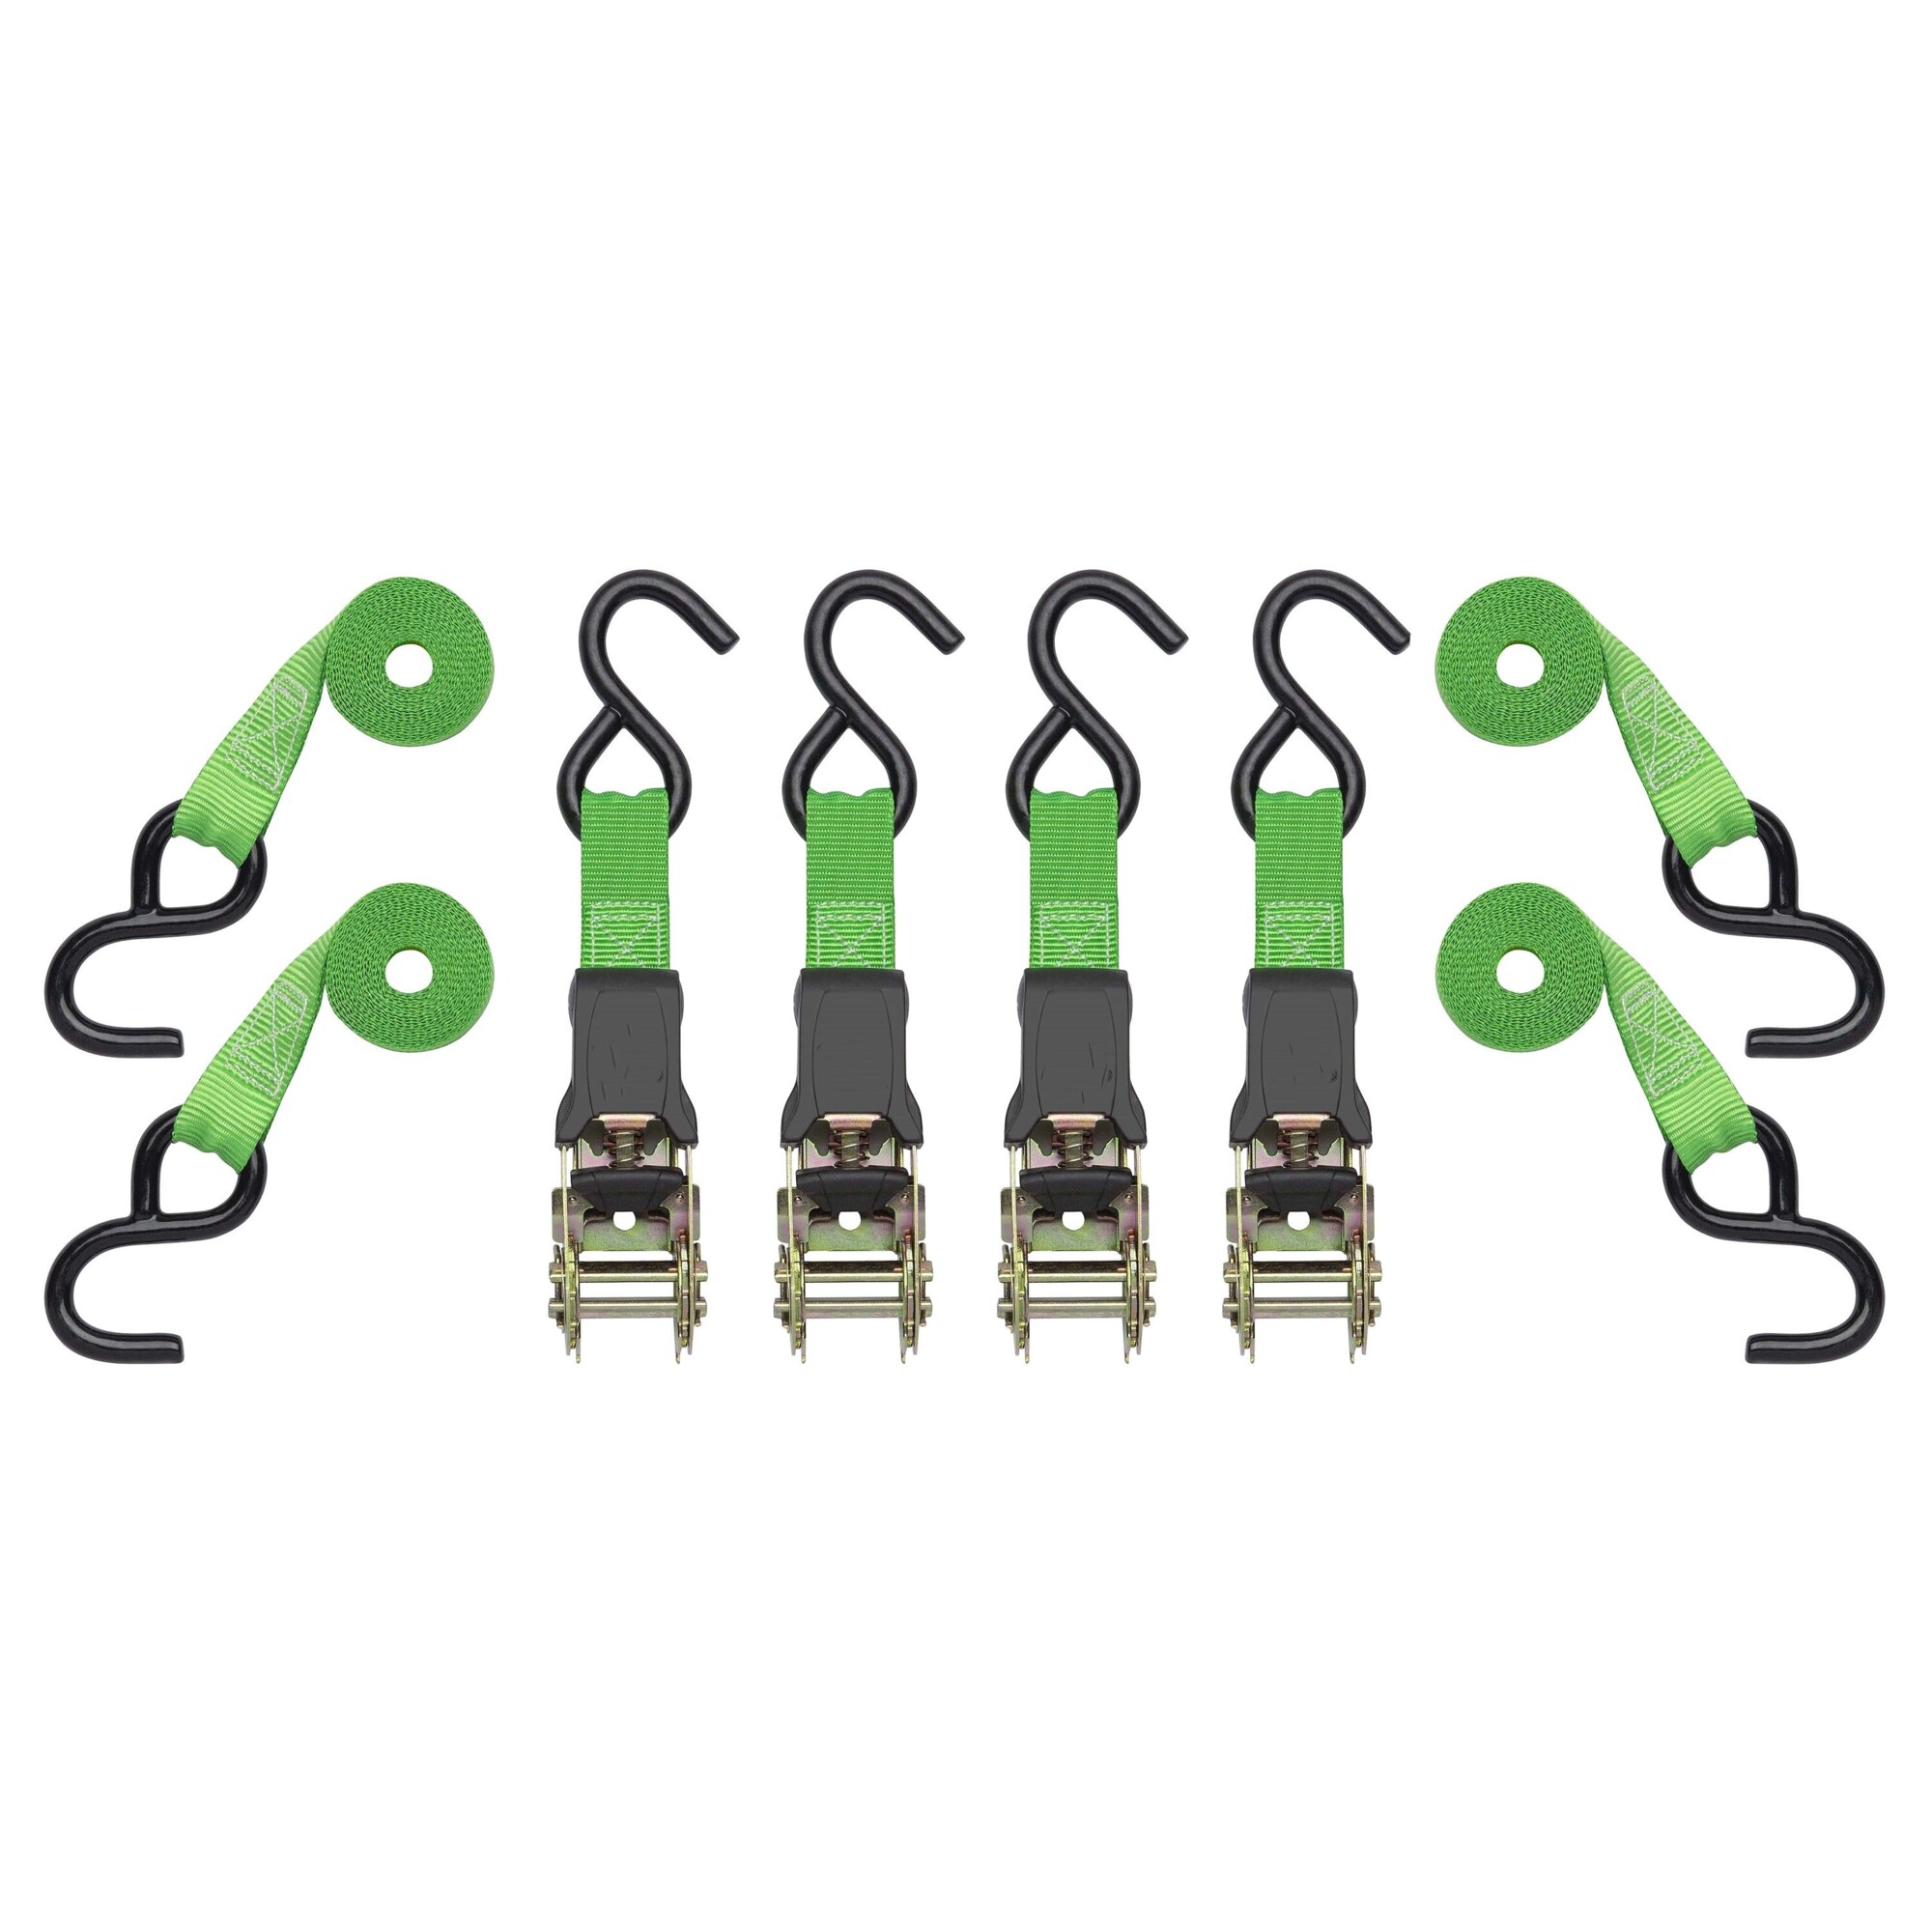 Ultra-Tow 4-Pack 14ft. Padded Ratchet Tie-Down Straps, 500-lb. Working Load, 1500-lb. Capacity, 14ft.L, Green Polyester, Model 9298